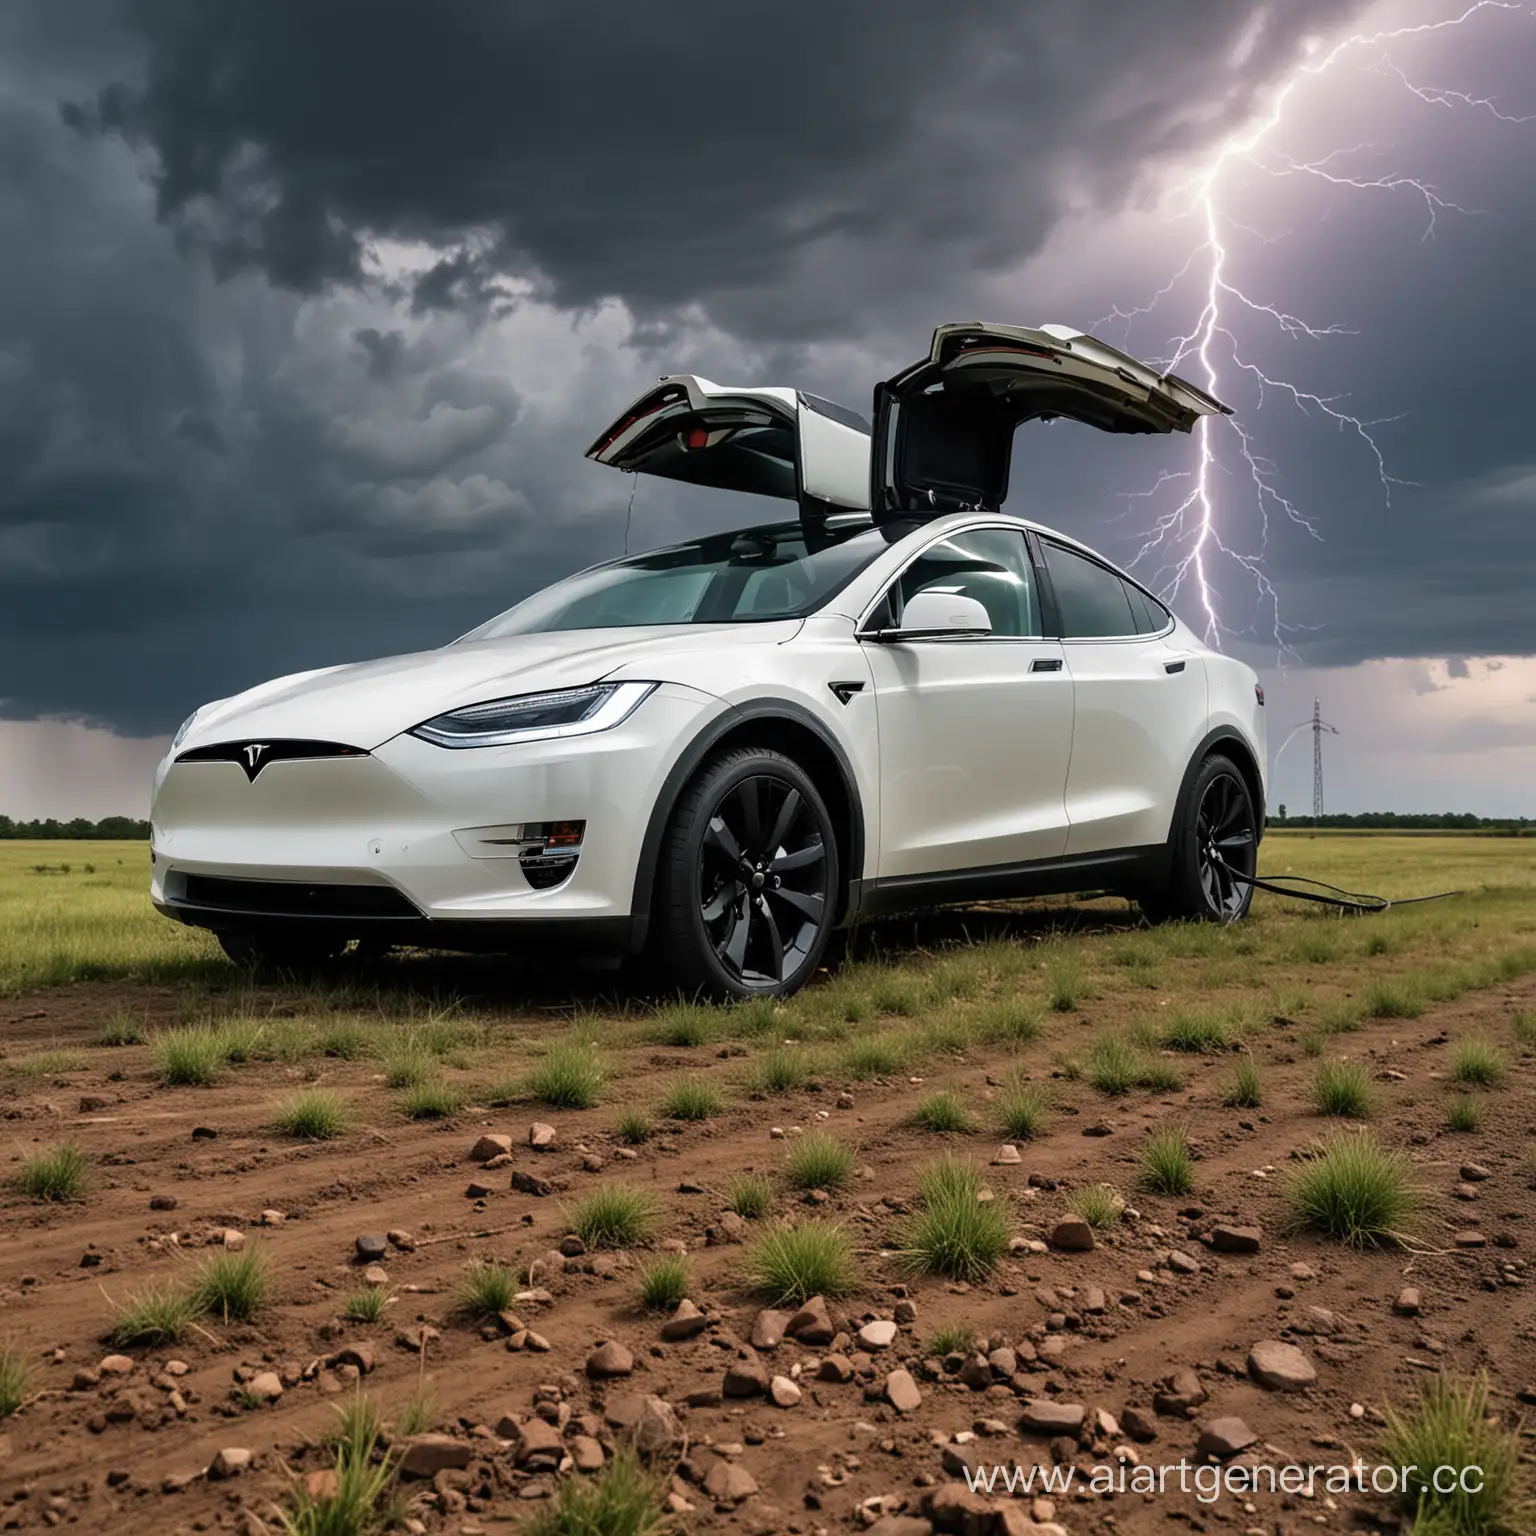 Tesla-Electric-Car-in-a-Serene-Field-with-a-Towering-Electroscope-Attracting-Lightning